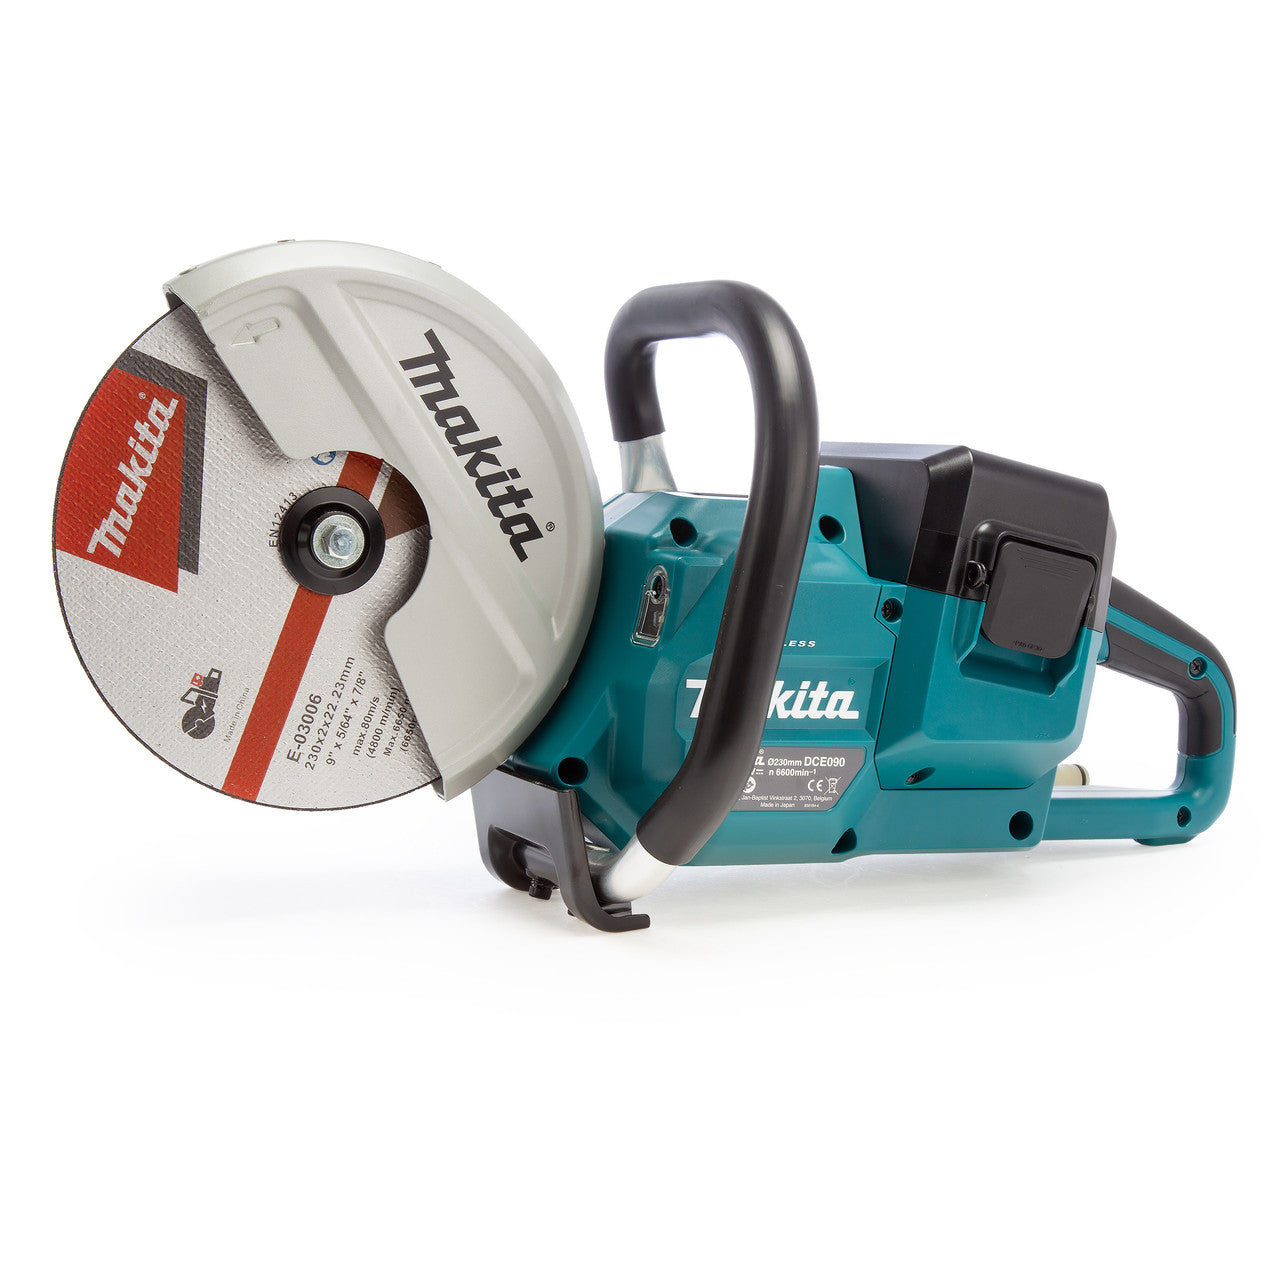 Makita DCE090ZX1 36V LXT 230mm Brushless Disc Cutter (Body Only)